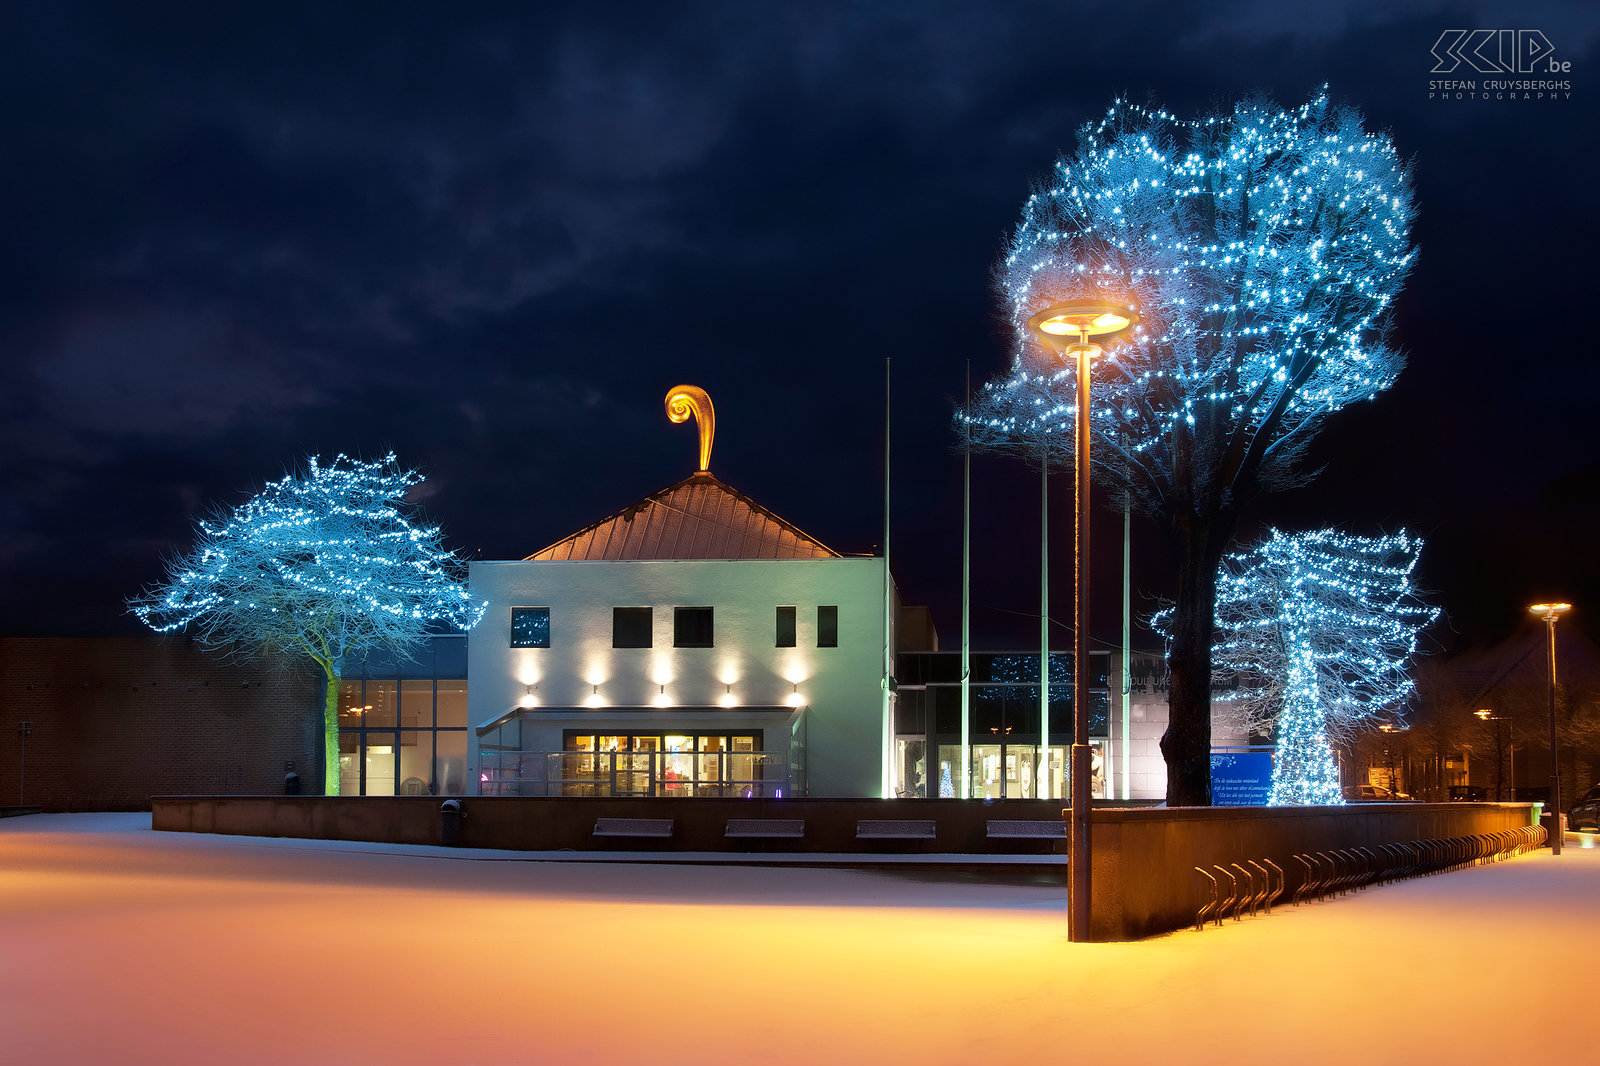 Lommel by night - CC Adelberg After some fresh snowfall in the Christmas week I made a night photo of the cultural center De Adelberg in my hometown Lommel. The building has a golden sculpture on top of the roof which is created by the artist Luk Van Soom. Stefan Cruysberghs